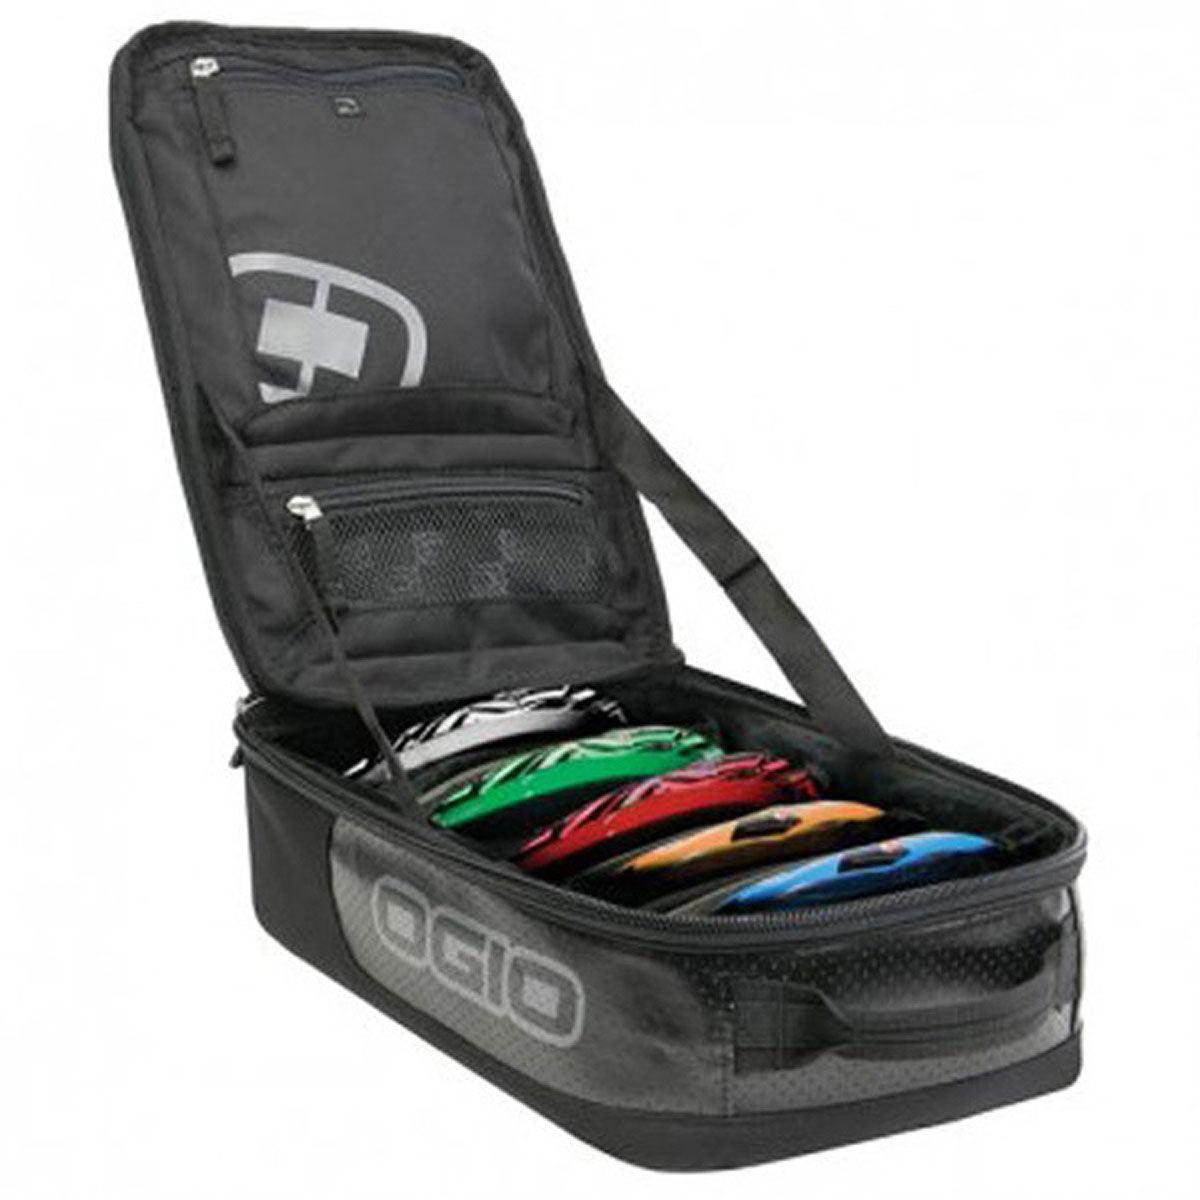 Ogio Goggle Carry Box 'Stealth' - Black - The Motocrosshut